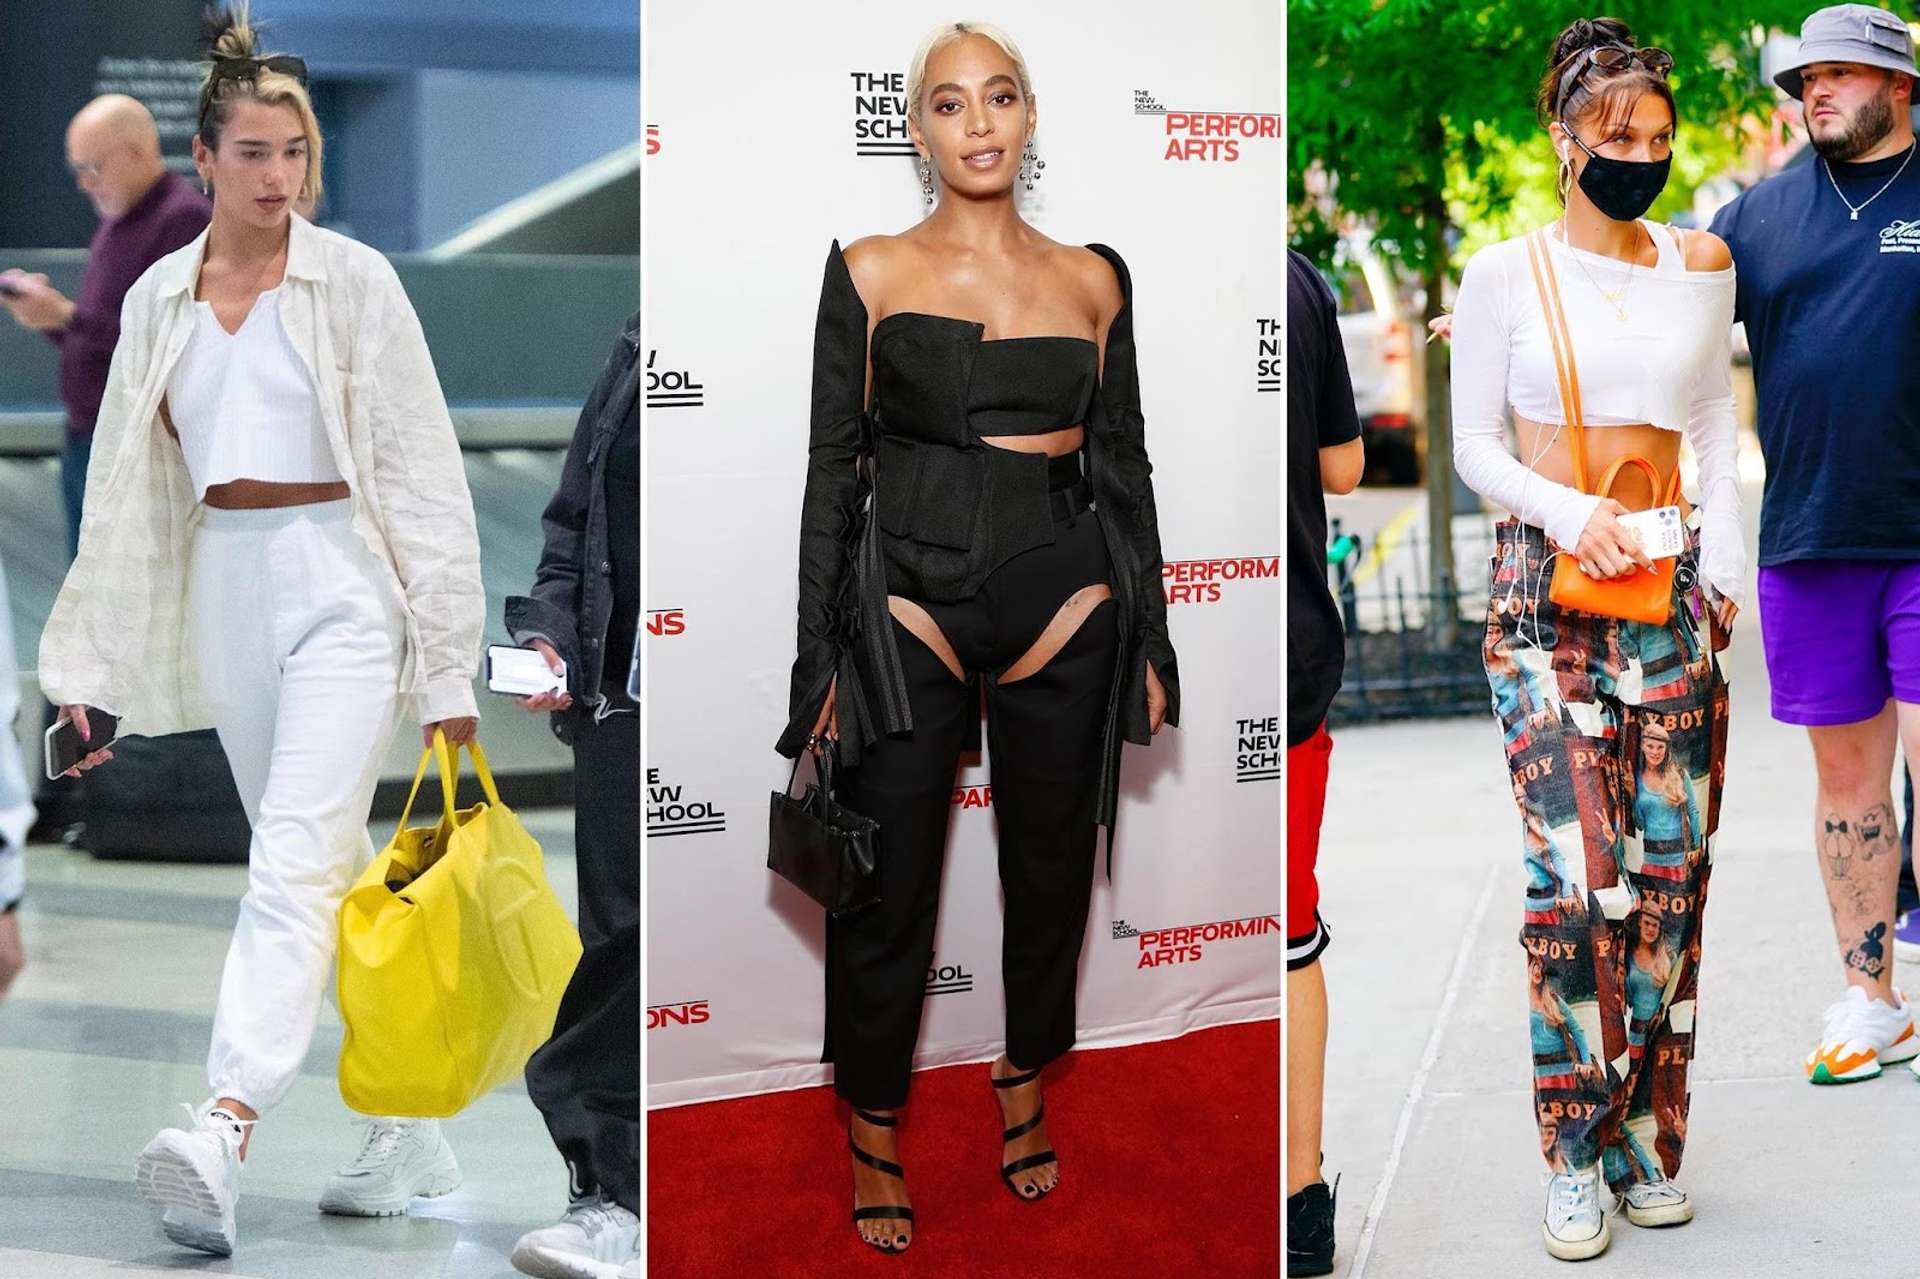 A collage of images of singer Dua Lipa, artist Solange Knowles and model Bella Hadid wearing Telfar’s Shopping Bag.